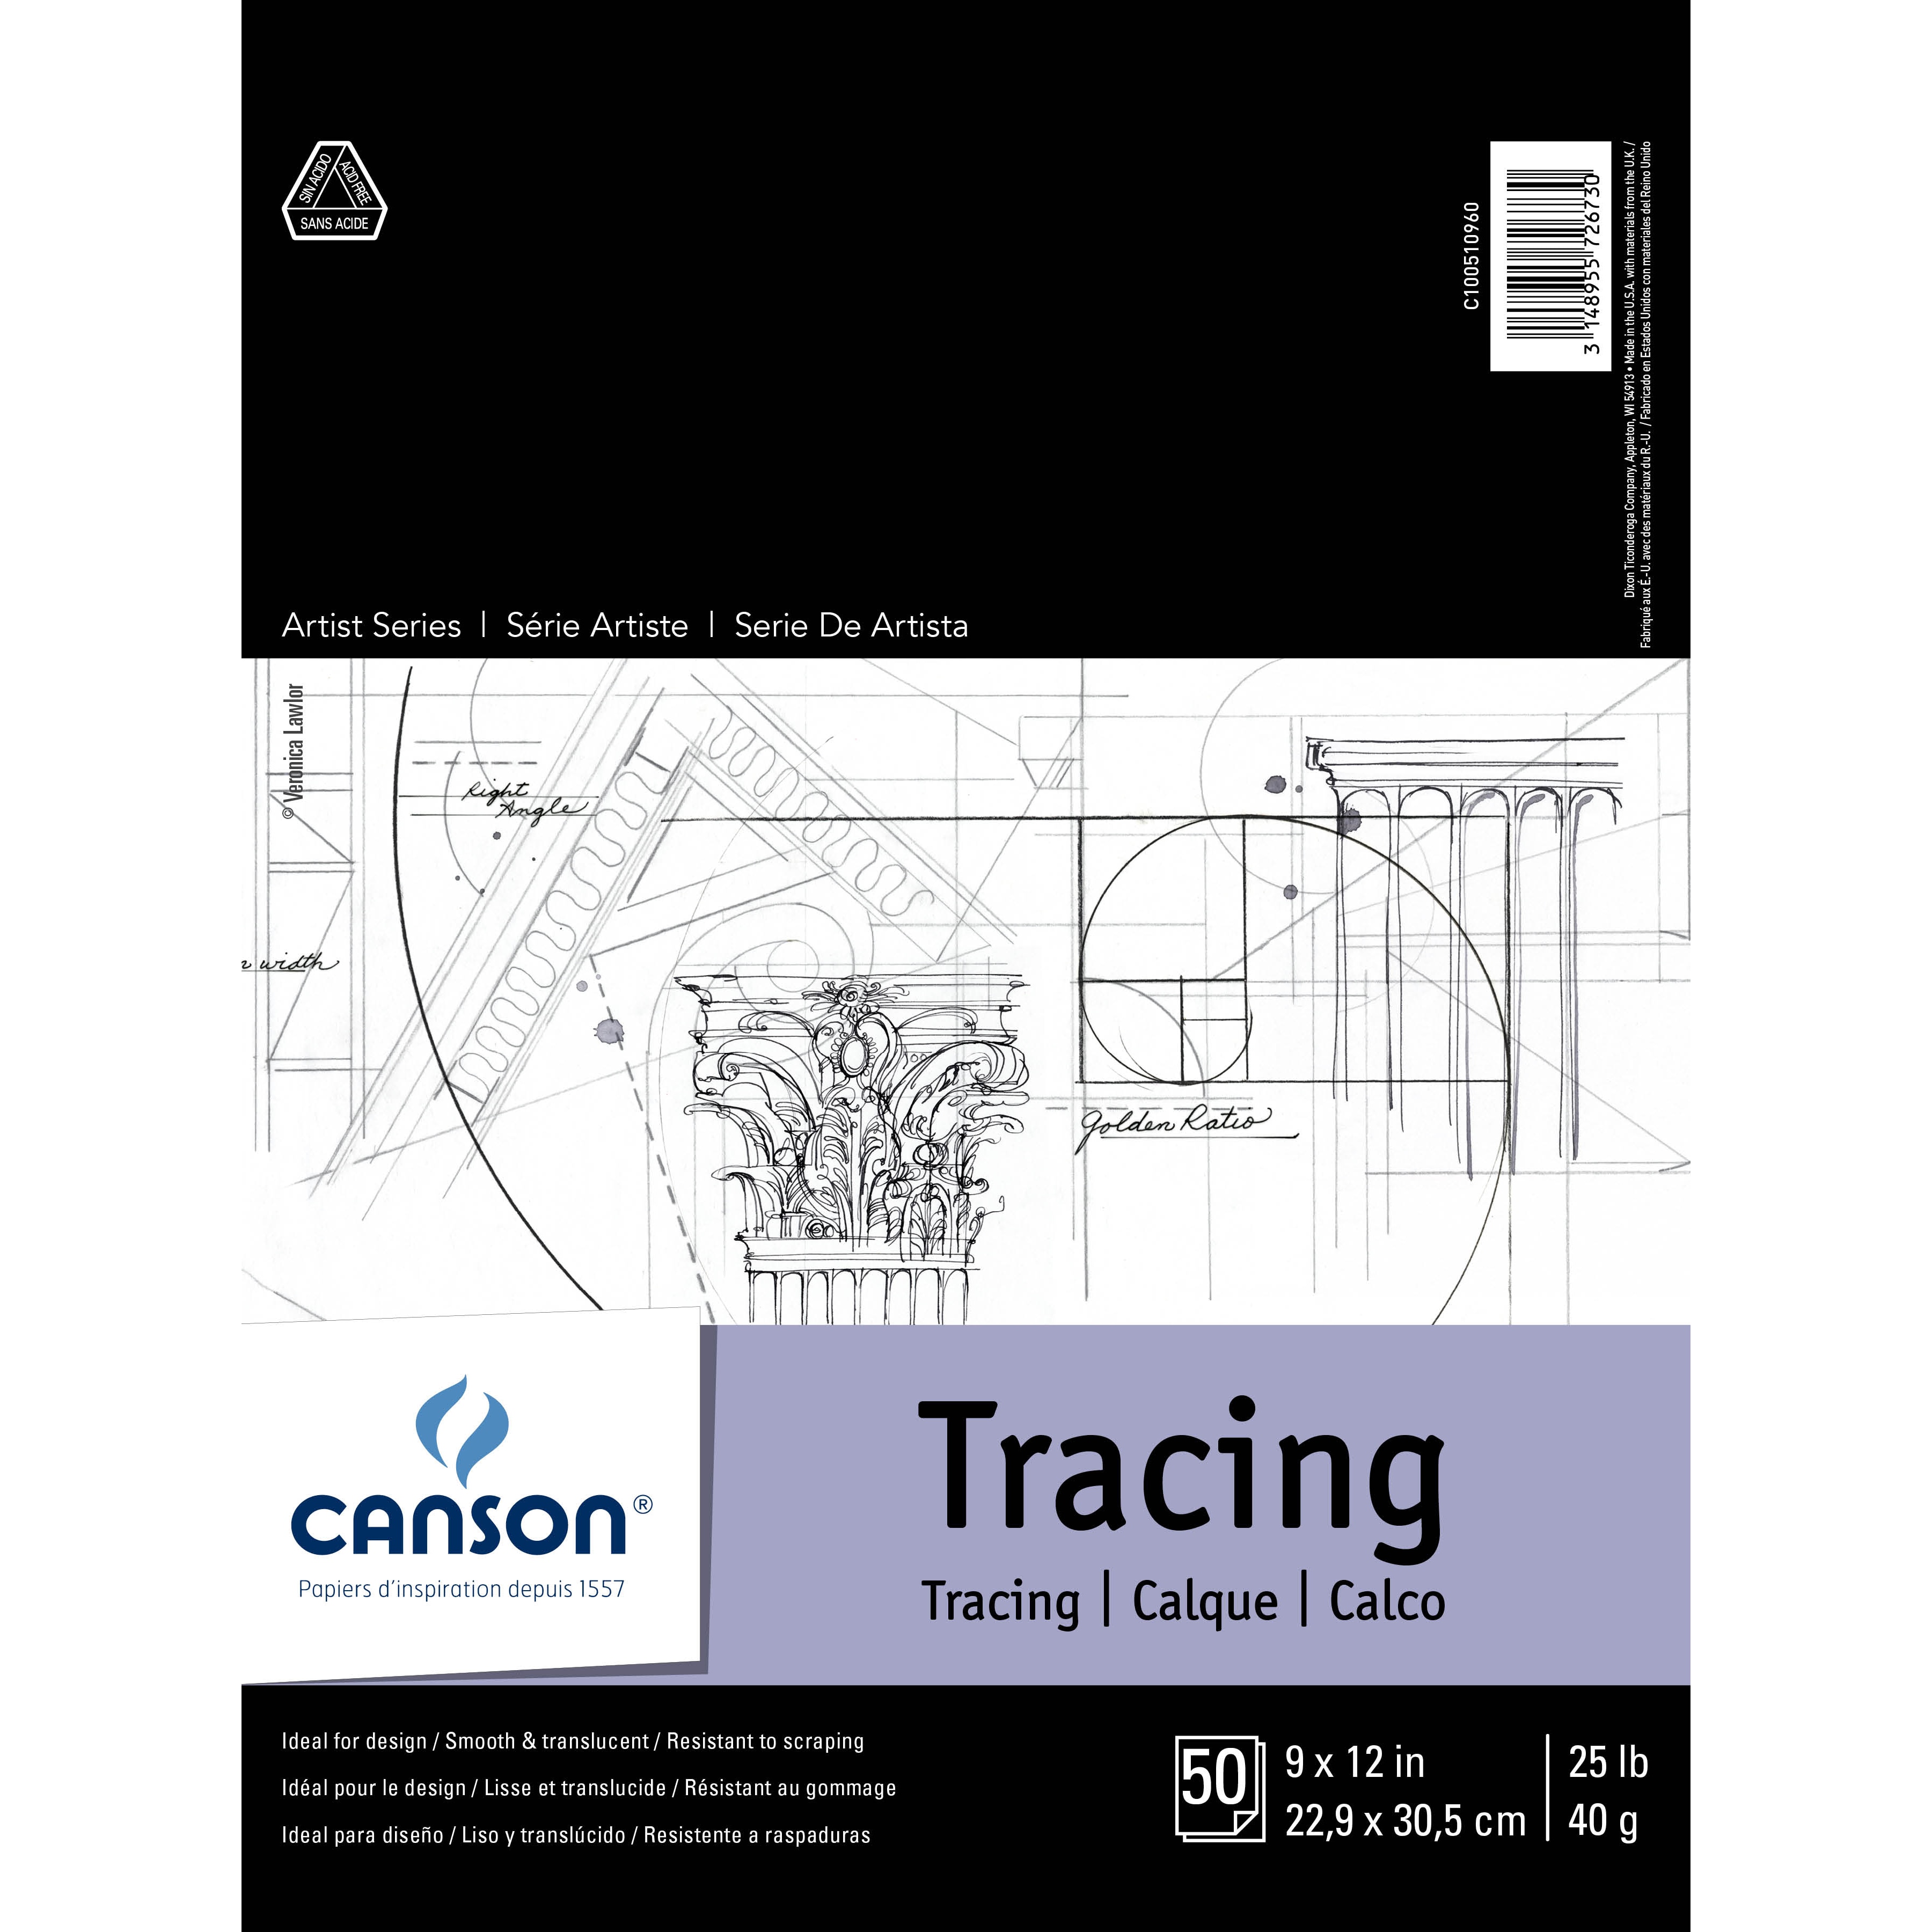 Canson Artist Series Tracing Pad, 50 Sheets, 9" x 12"